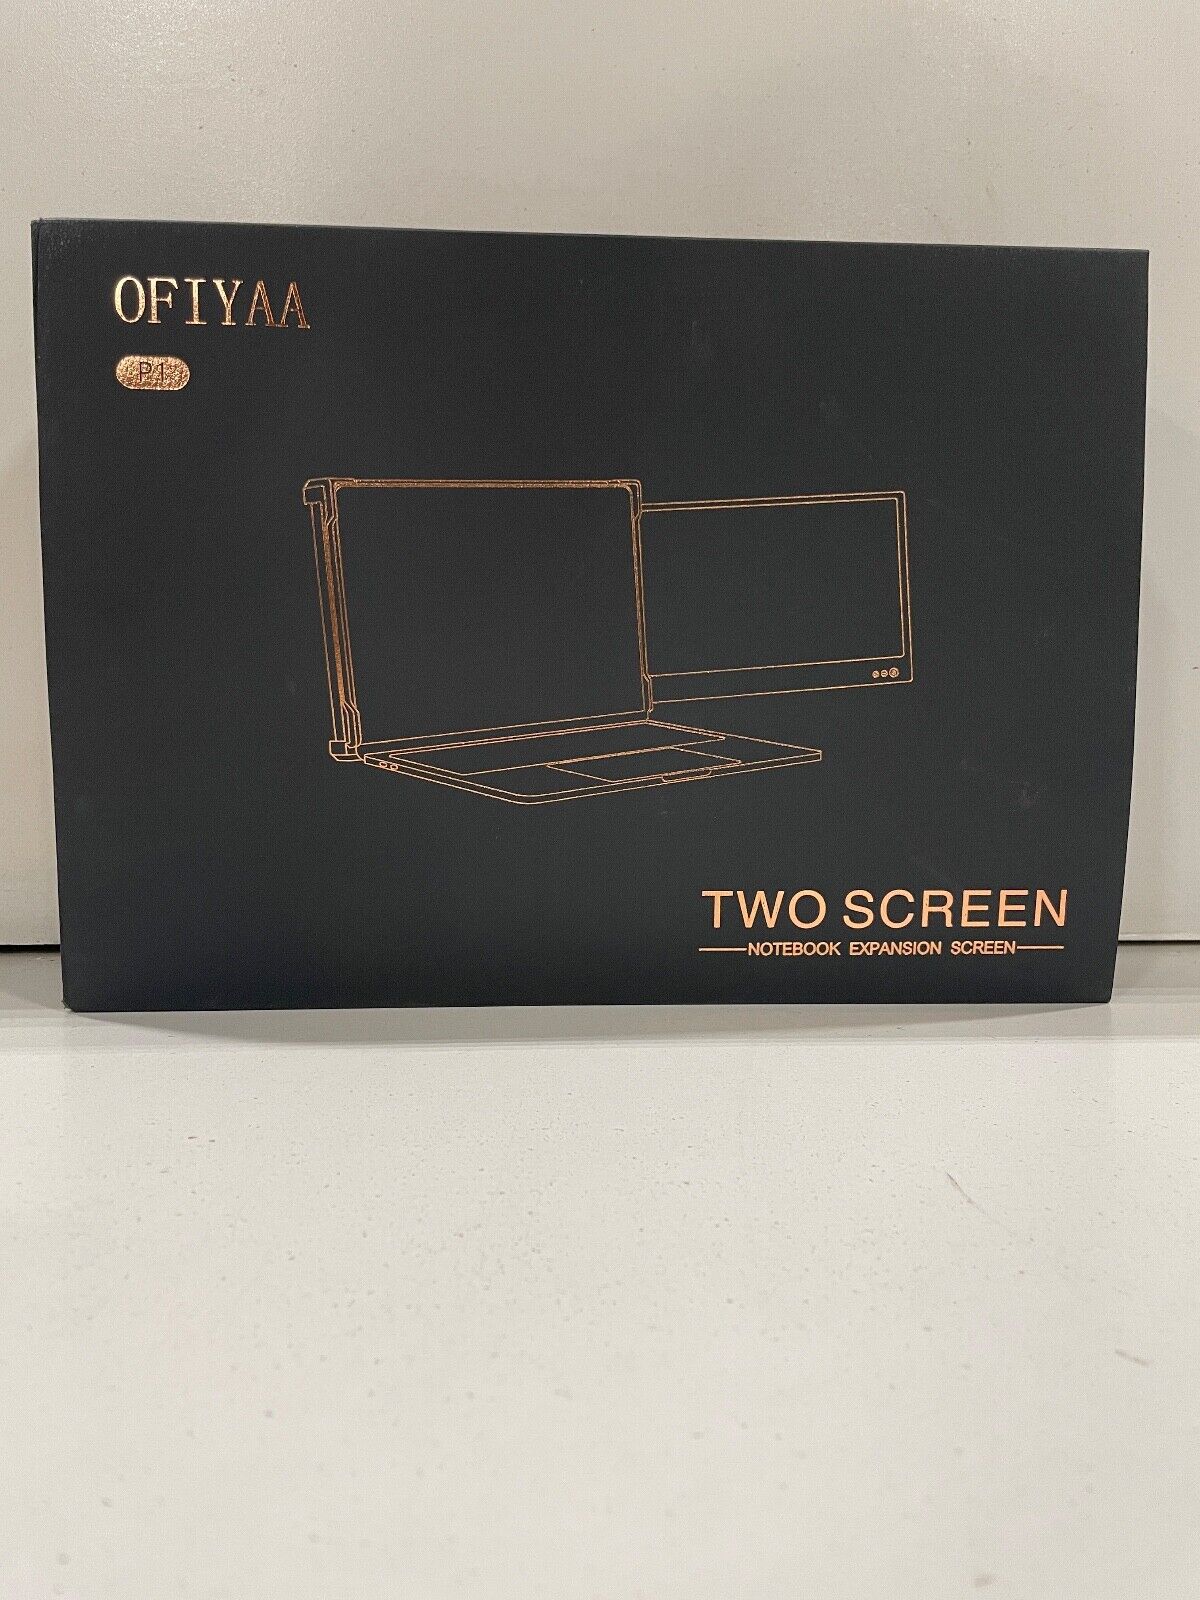 OFIYAA P1 12'' Portable Monitor Laptop Extender Dual Screen FHD IPS 2 Speakers